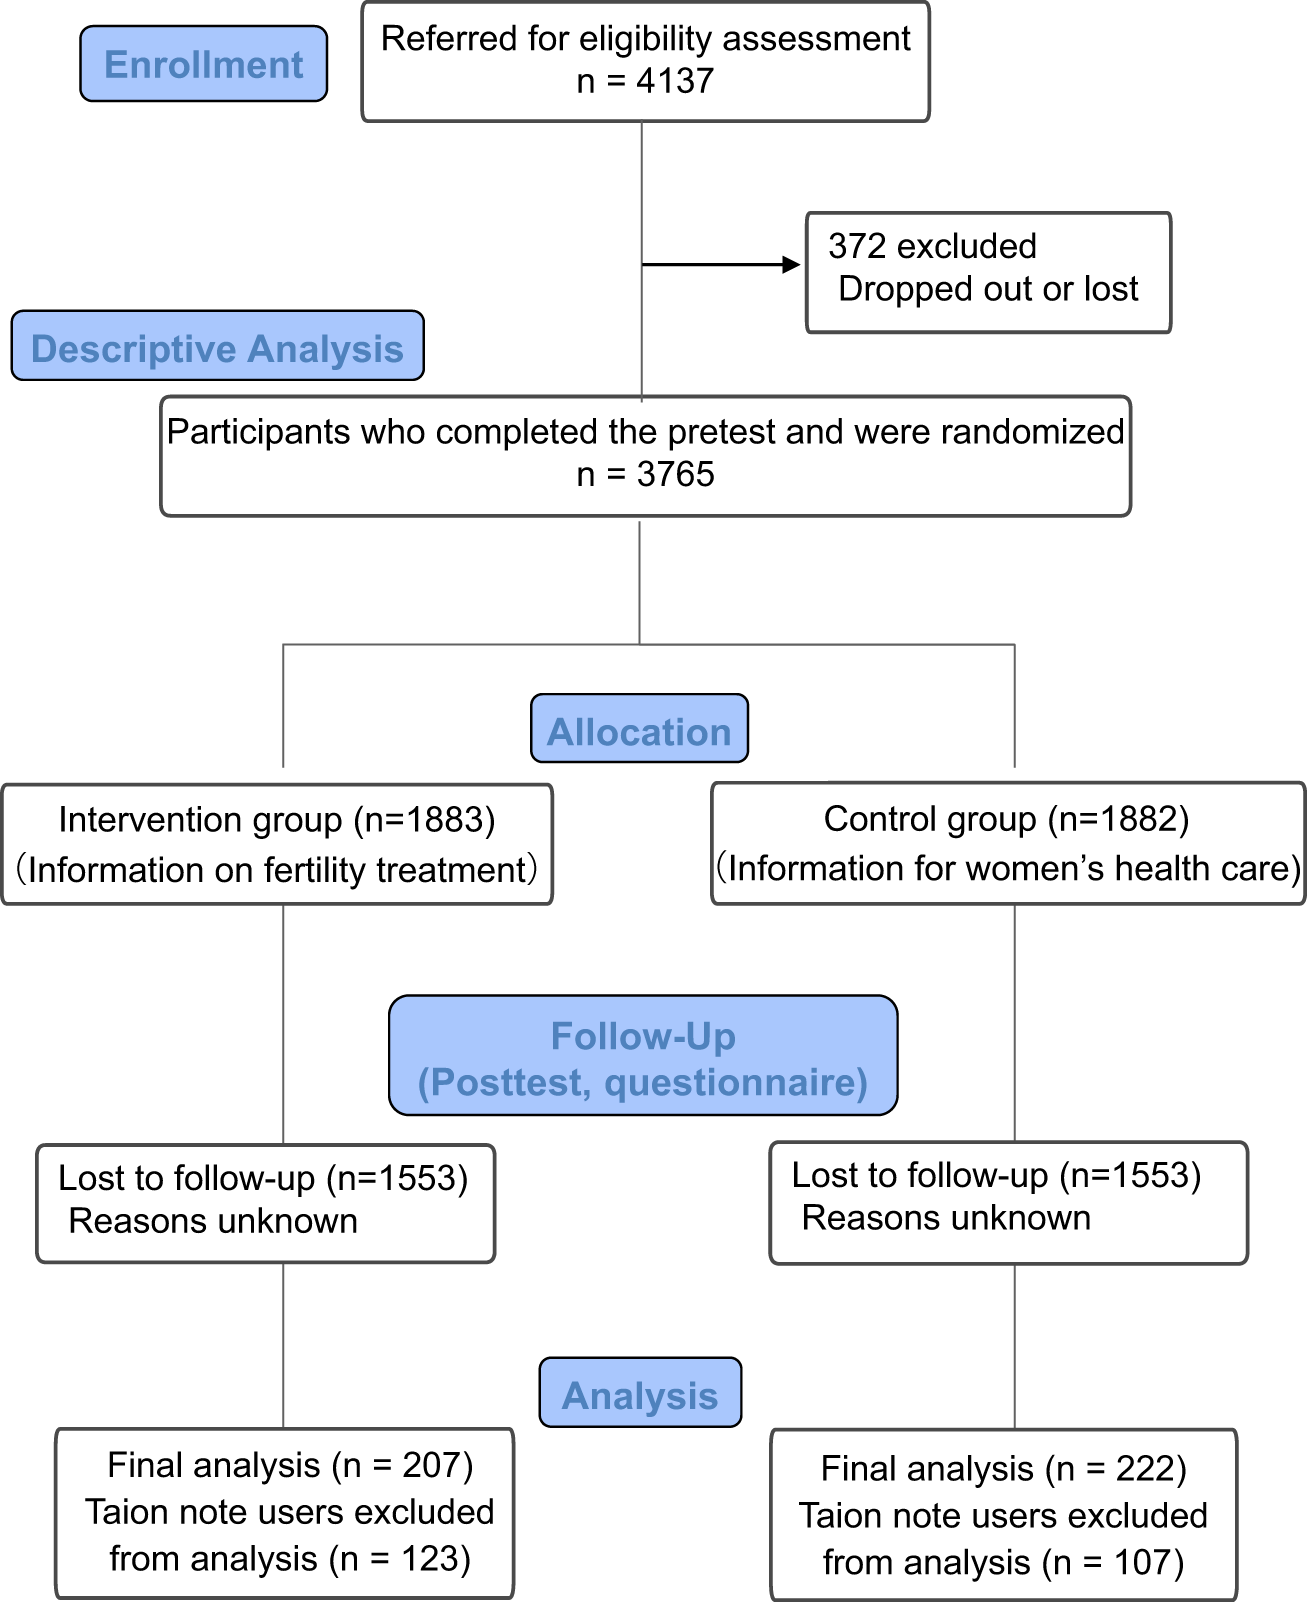 Smartphone application improves fertility treatment-related literacy in a large-scale virtual randomized controlled trial in Japan npj Digital Medicine